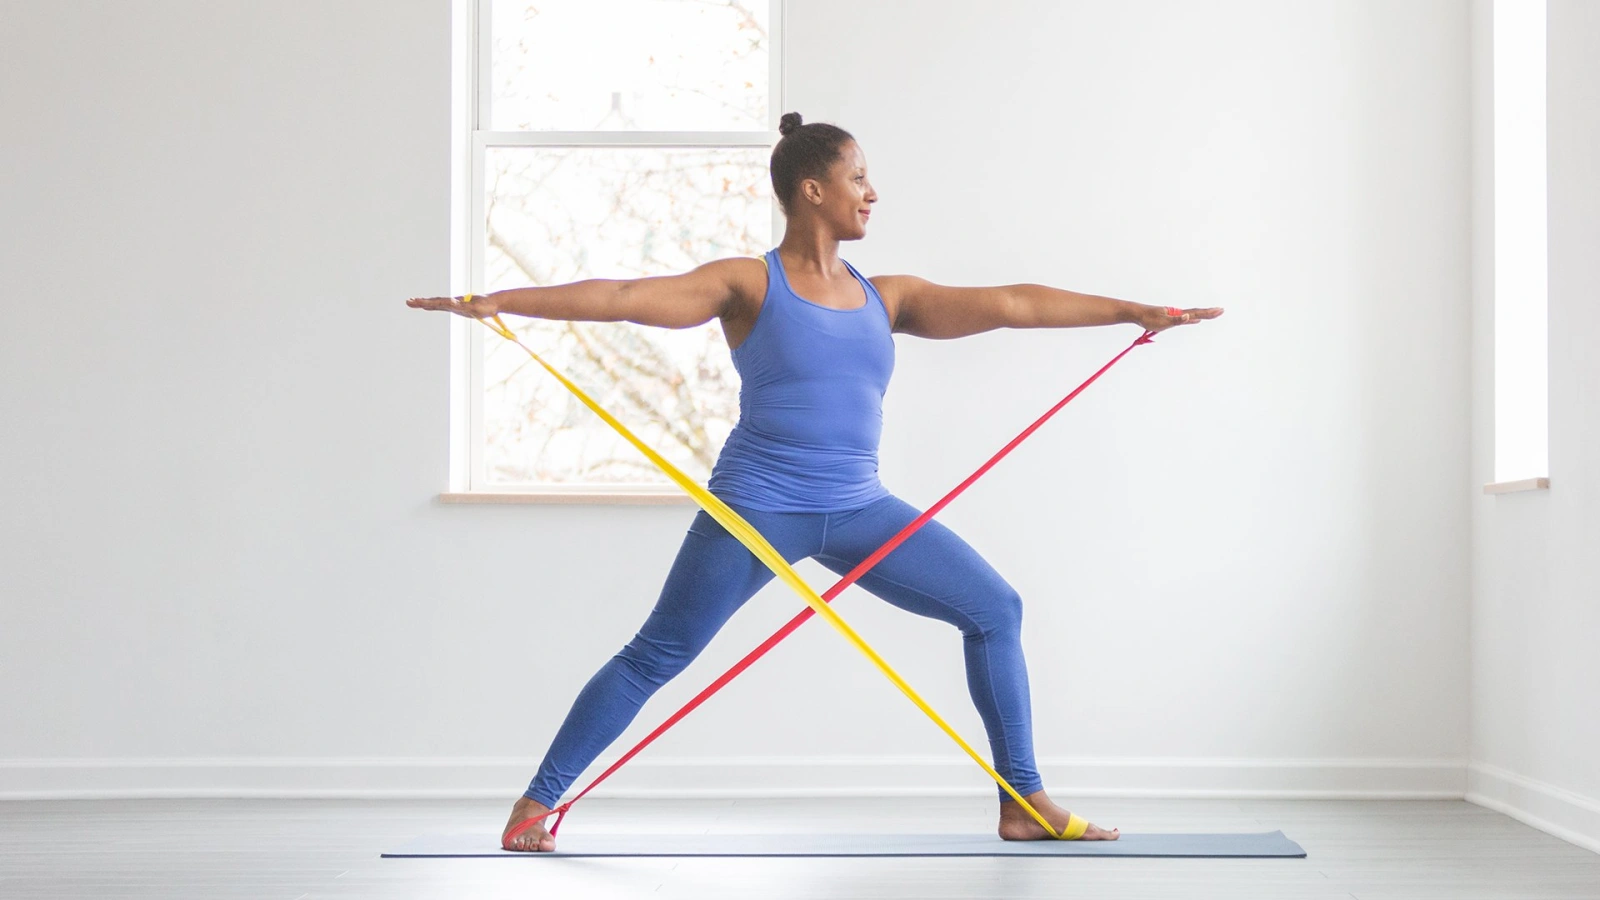 5 Reasons to Add Resistance Bands to Your Yoga Practice